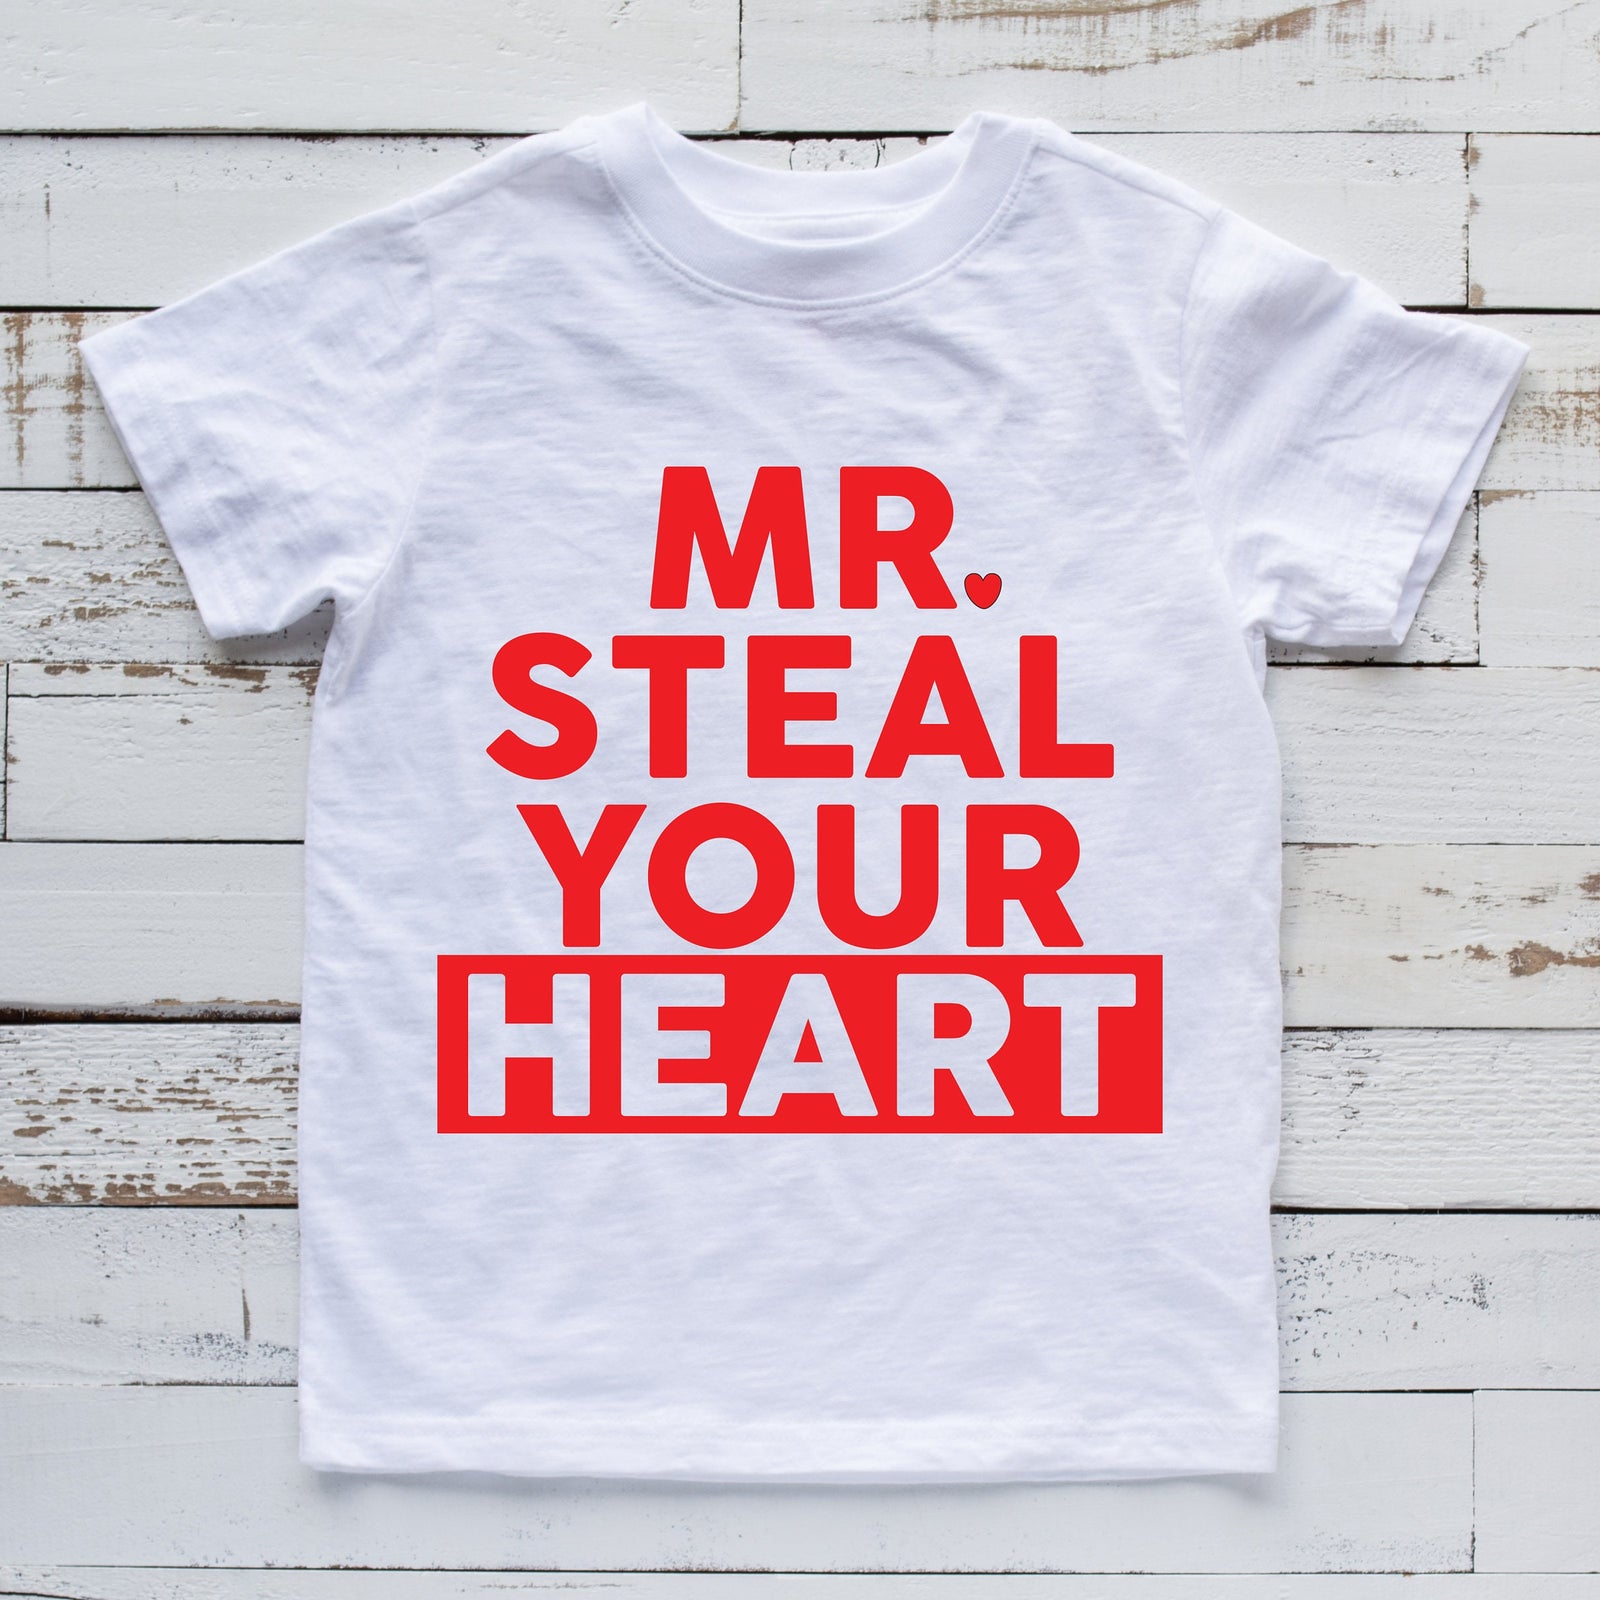 Mr Steal Your Heart T Shirt - Funny Valentine Shirt - Love T Shirt - Heart Breaker Statement Shirt - Valentine's Humor Shirt